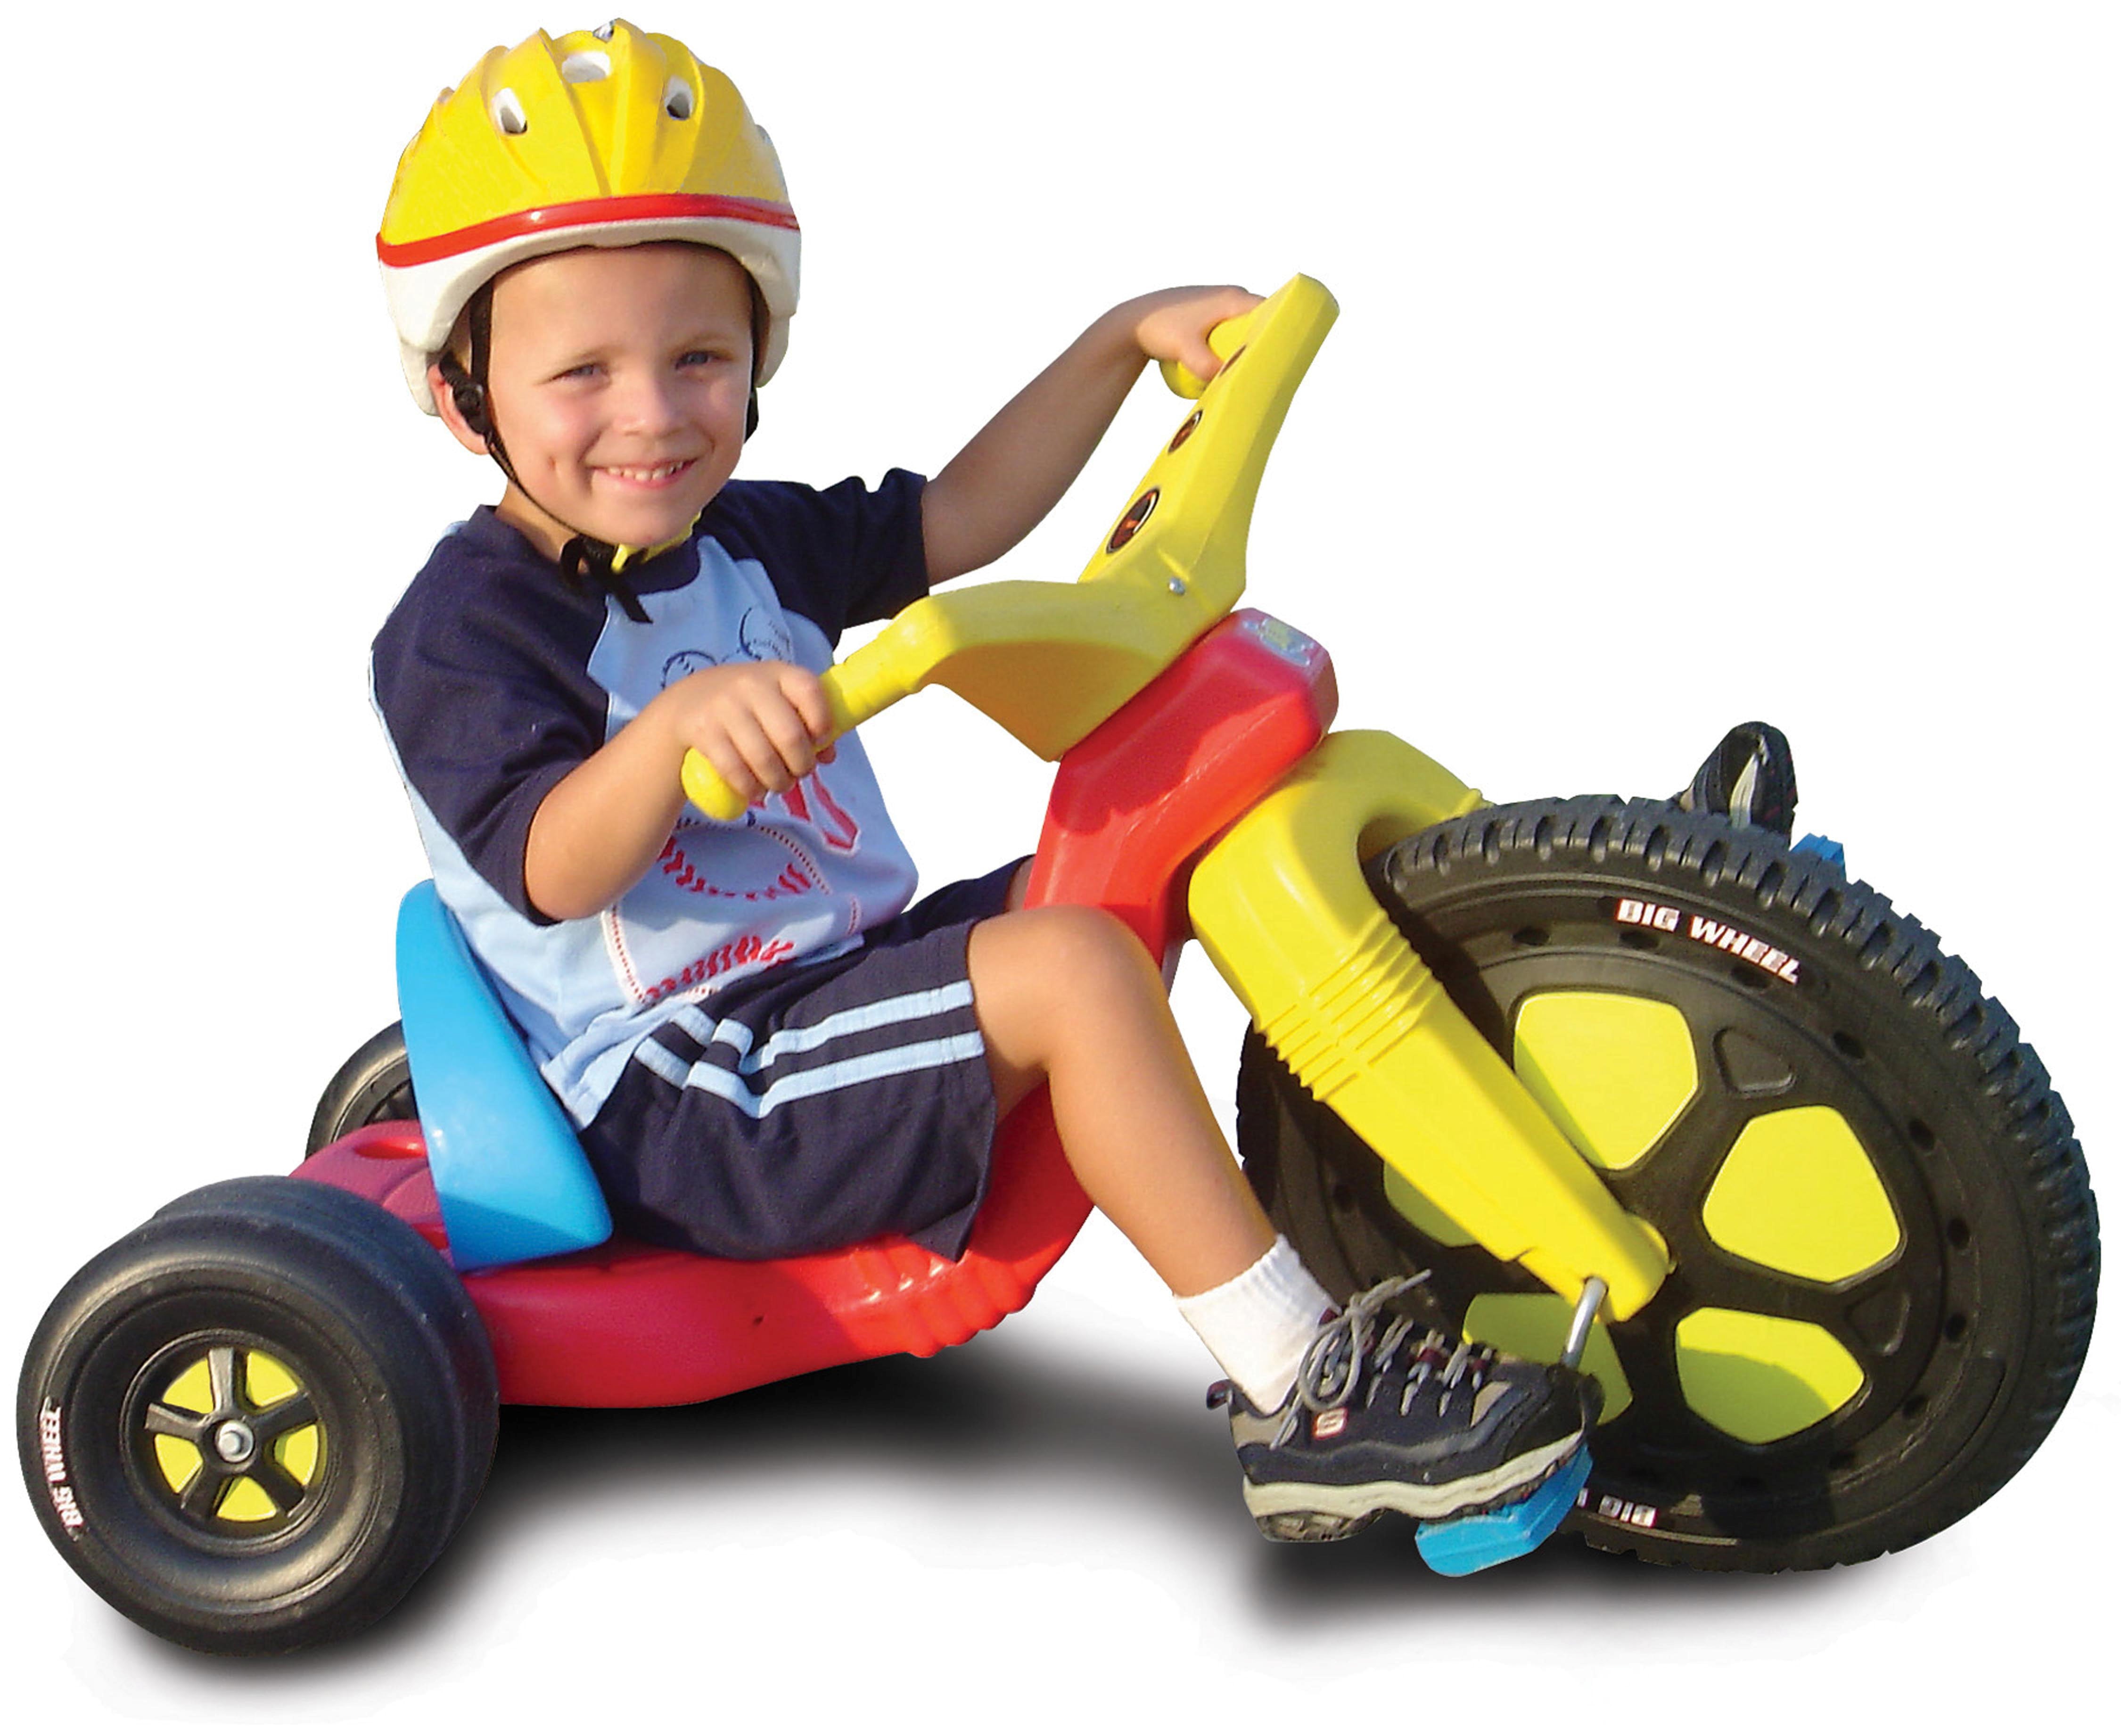 Big Wheel 50th Anniversary 16 Inch Ride-On Toy (Ages 3+)